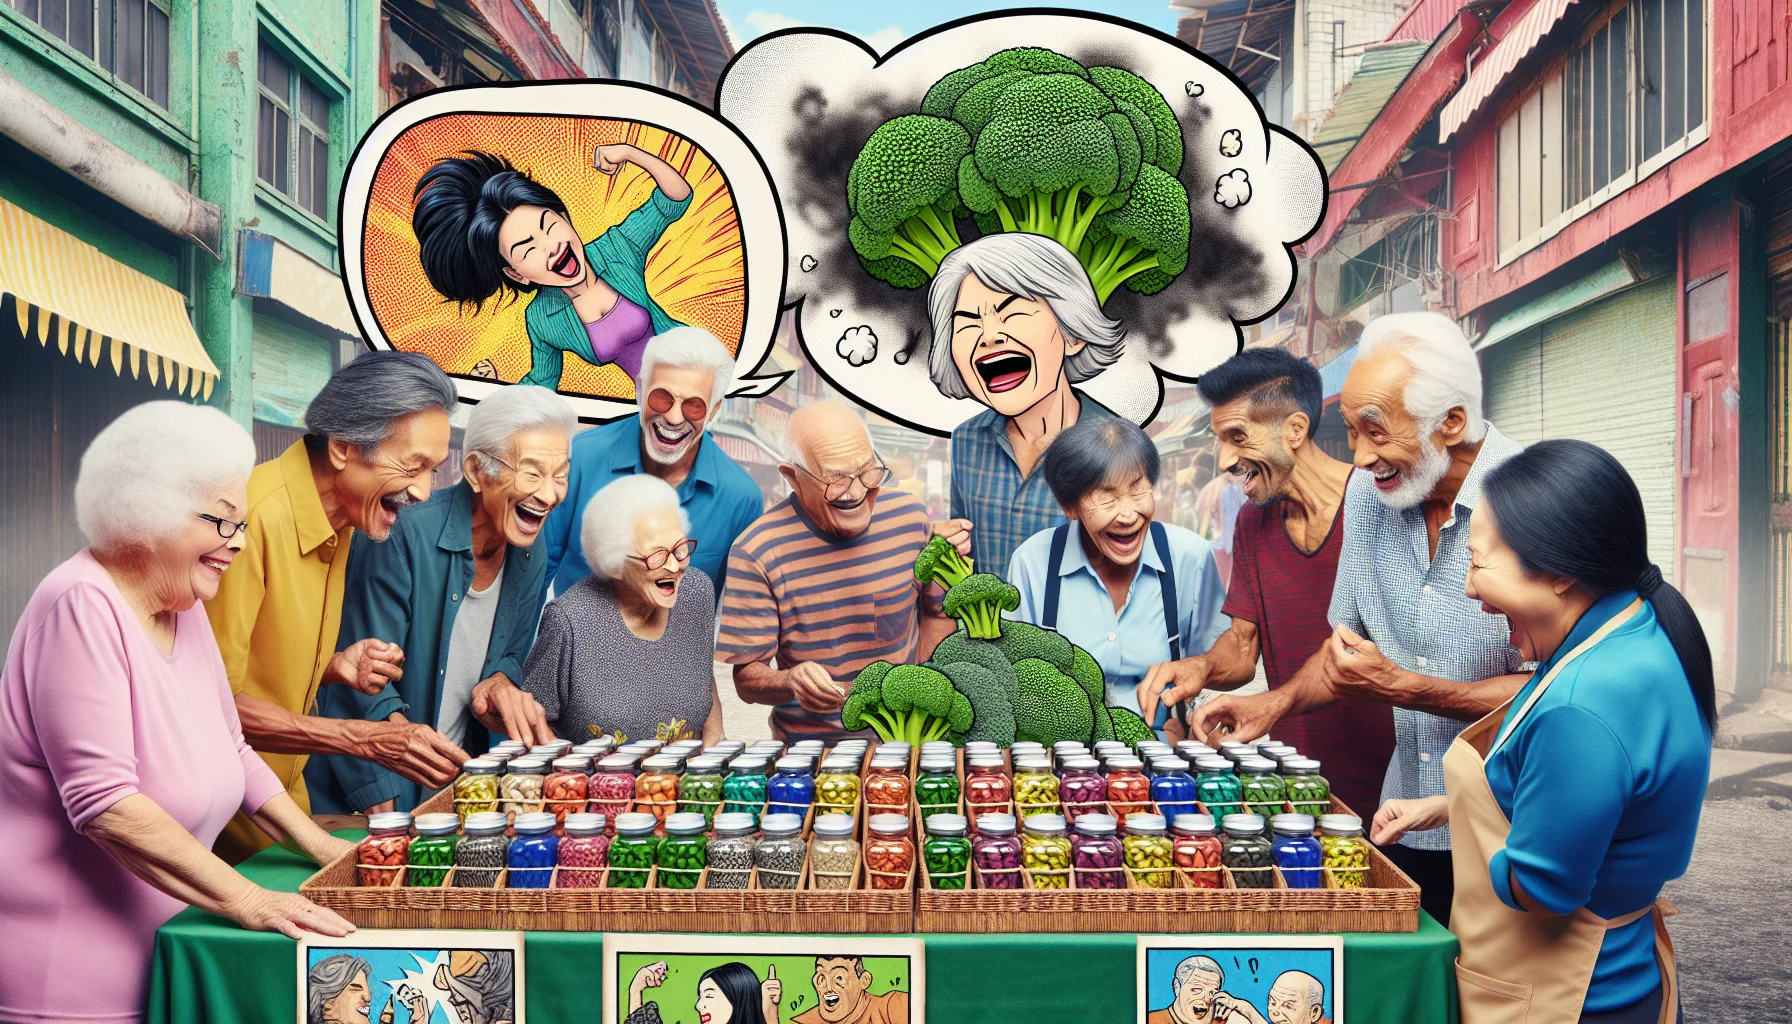 Create an image of a lively marketplace scene ripe with aged individuals enjoying their lives. A handful of elderly vendors, variously Hispanic, South Asian, and Middle Eastern, are enthusiastically selling colorful supplements labeled as 'anti-aging'. Customers, some Caucasian, others Black, are curiously inspecting the products and laughing over the exaggerated slogans on the labels. In the corner, is an Asian woman laughing with a vibrant green broccoli crown in one hand and a humorous comic strip illustration that shows broccoli fighting off grey smoky figures labeled 'age'.